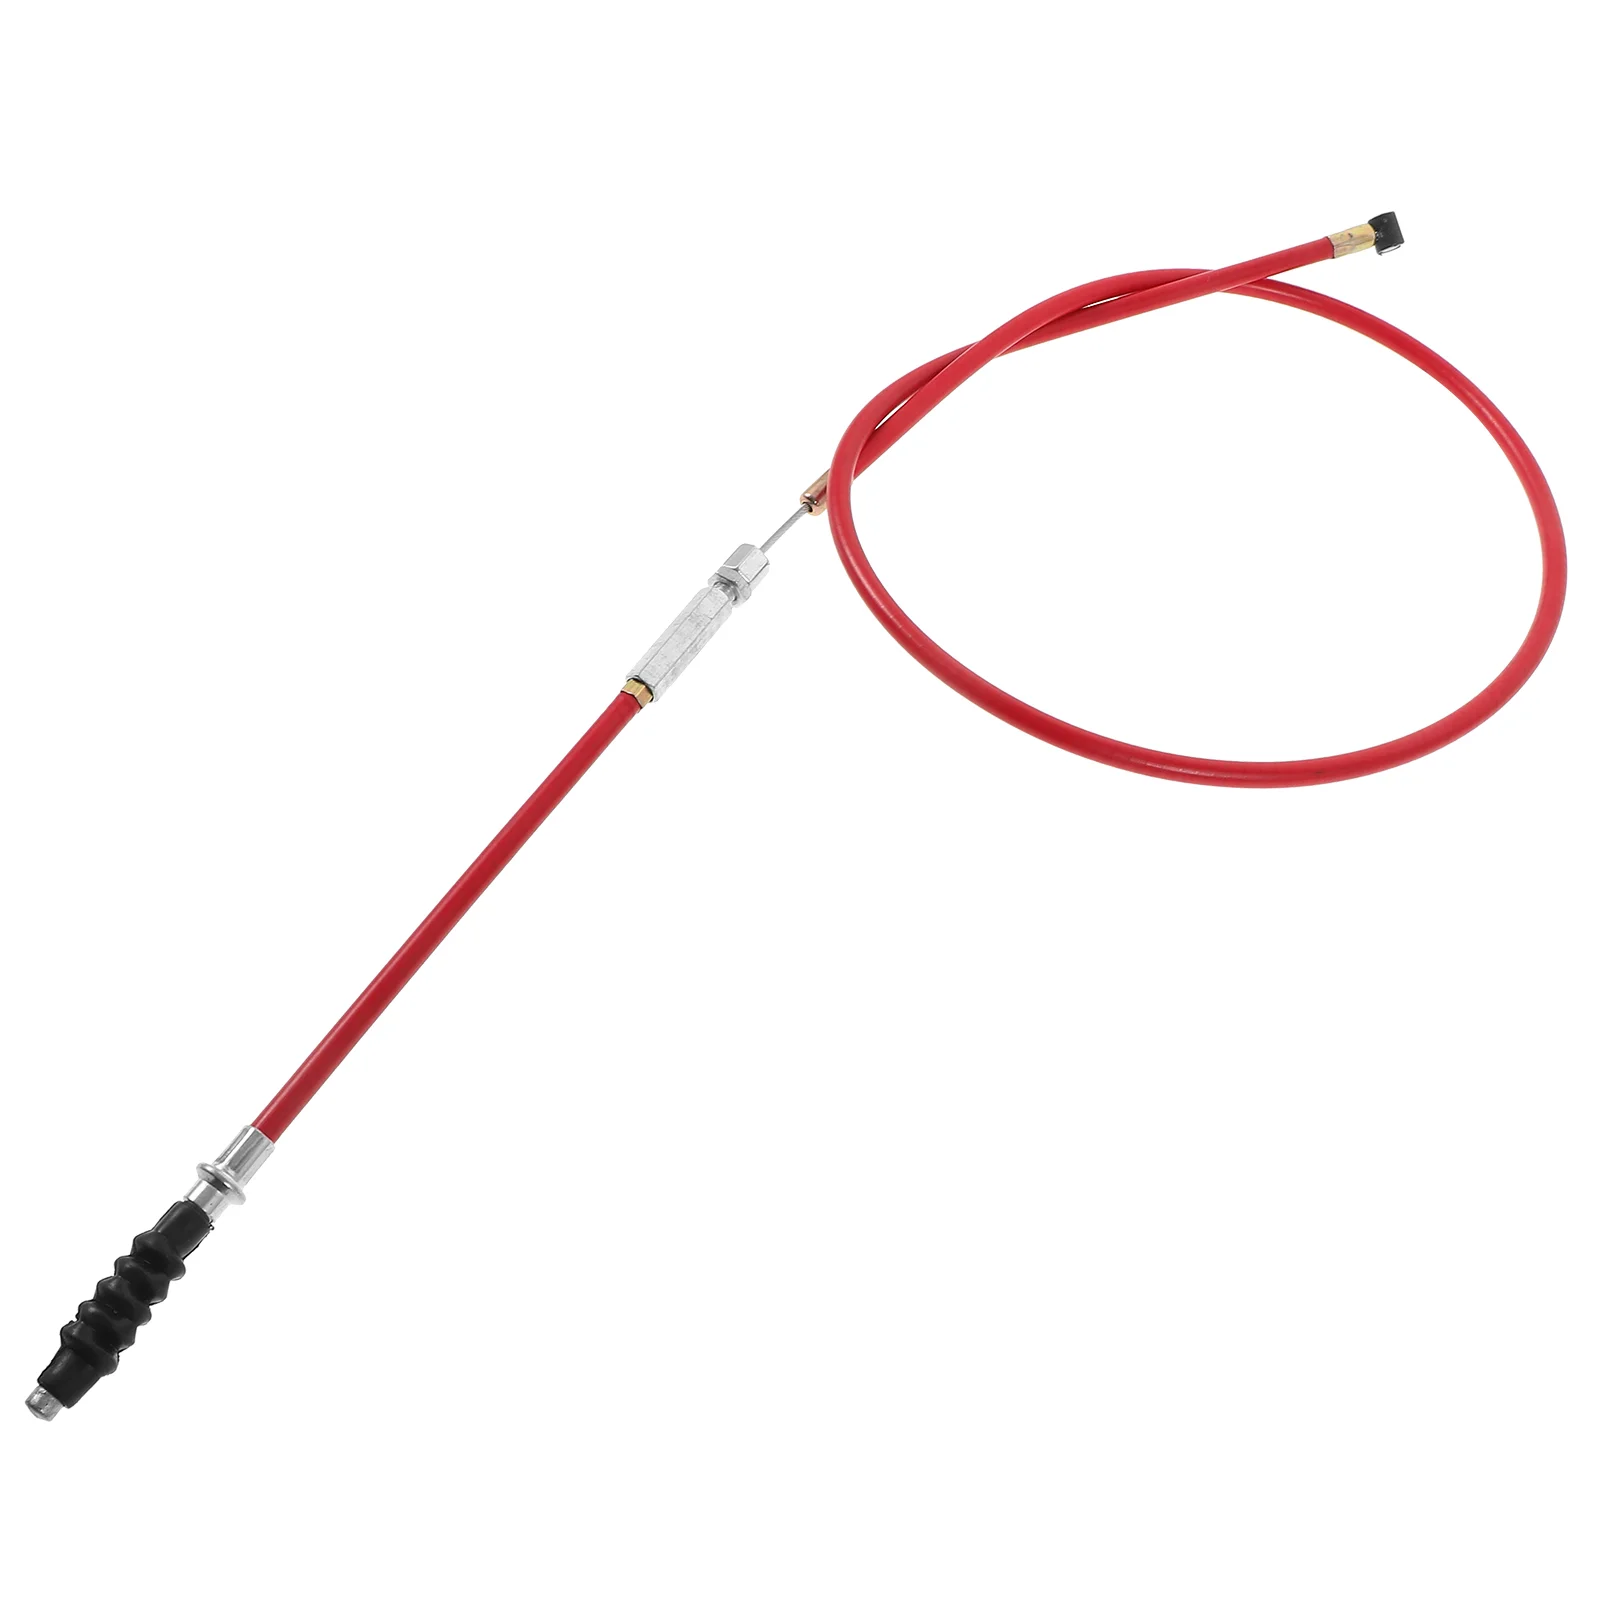 

Atv Accessories Clutch Cable for Dirt Bike Cord All Terrain Vehicle Replacement Red Pull